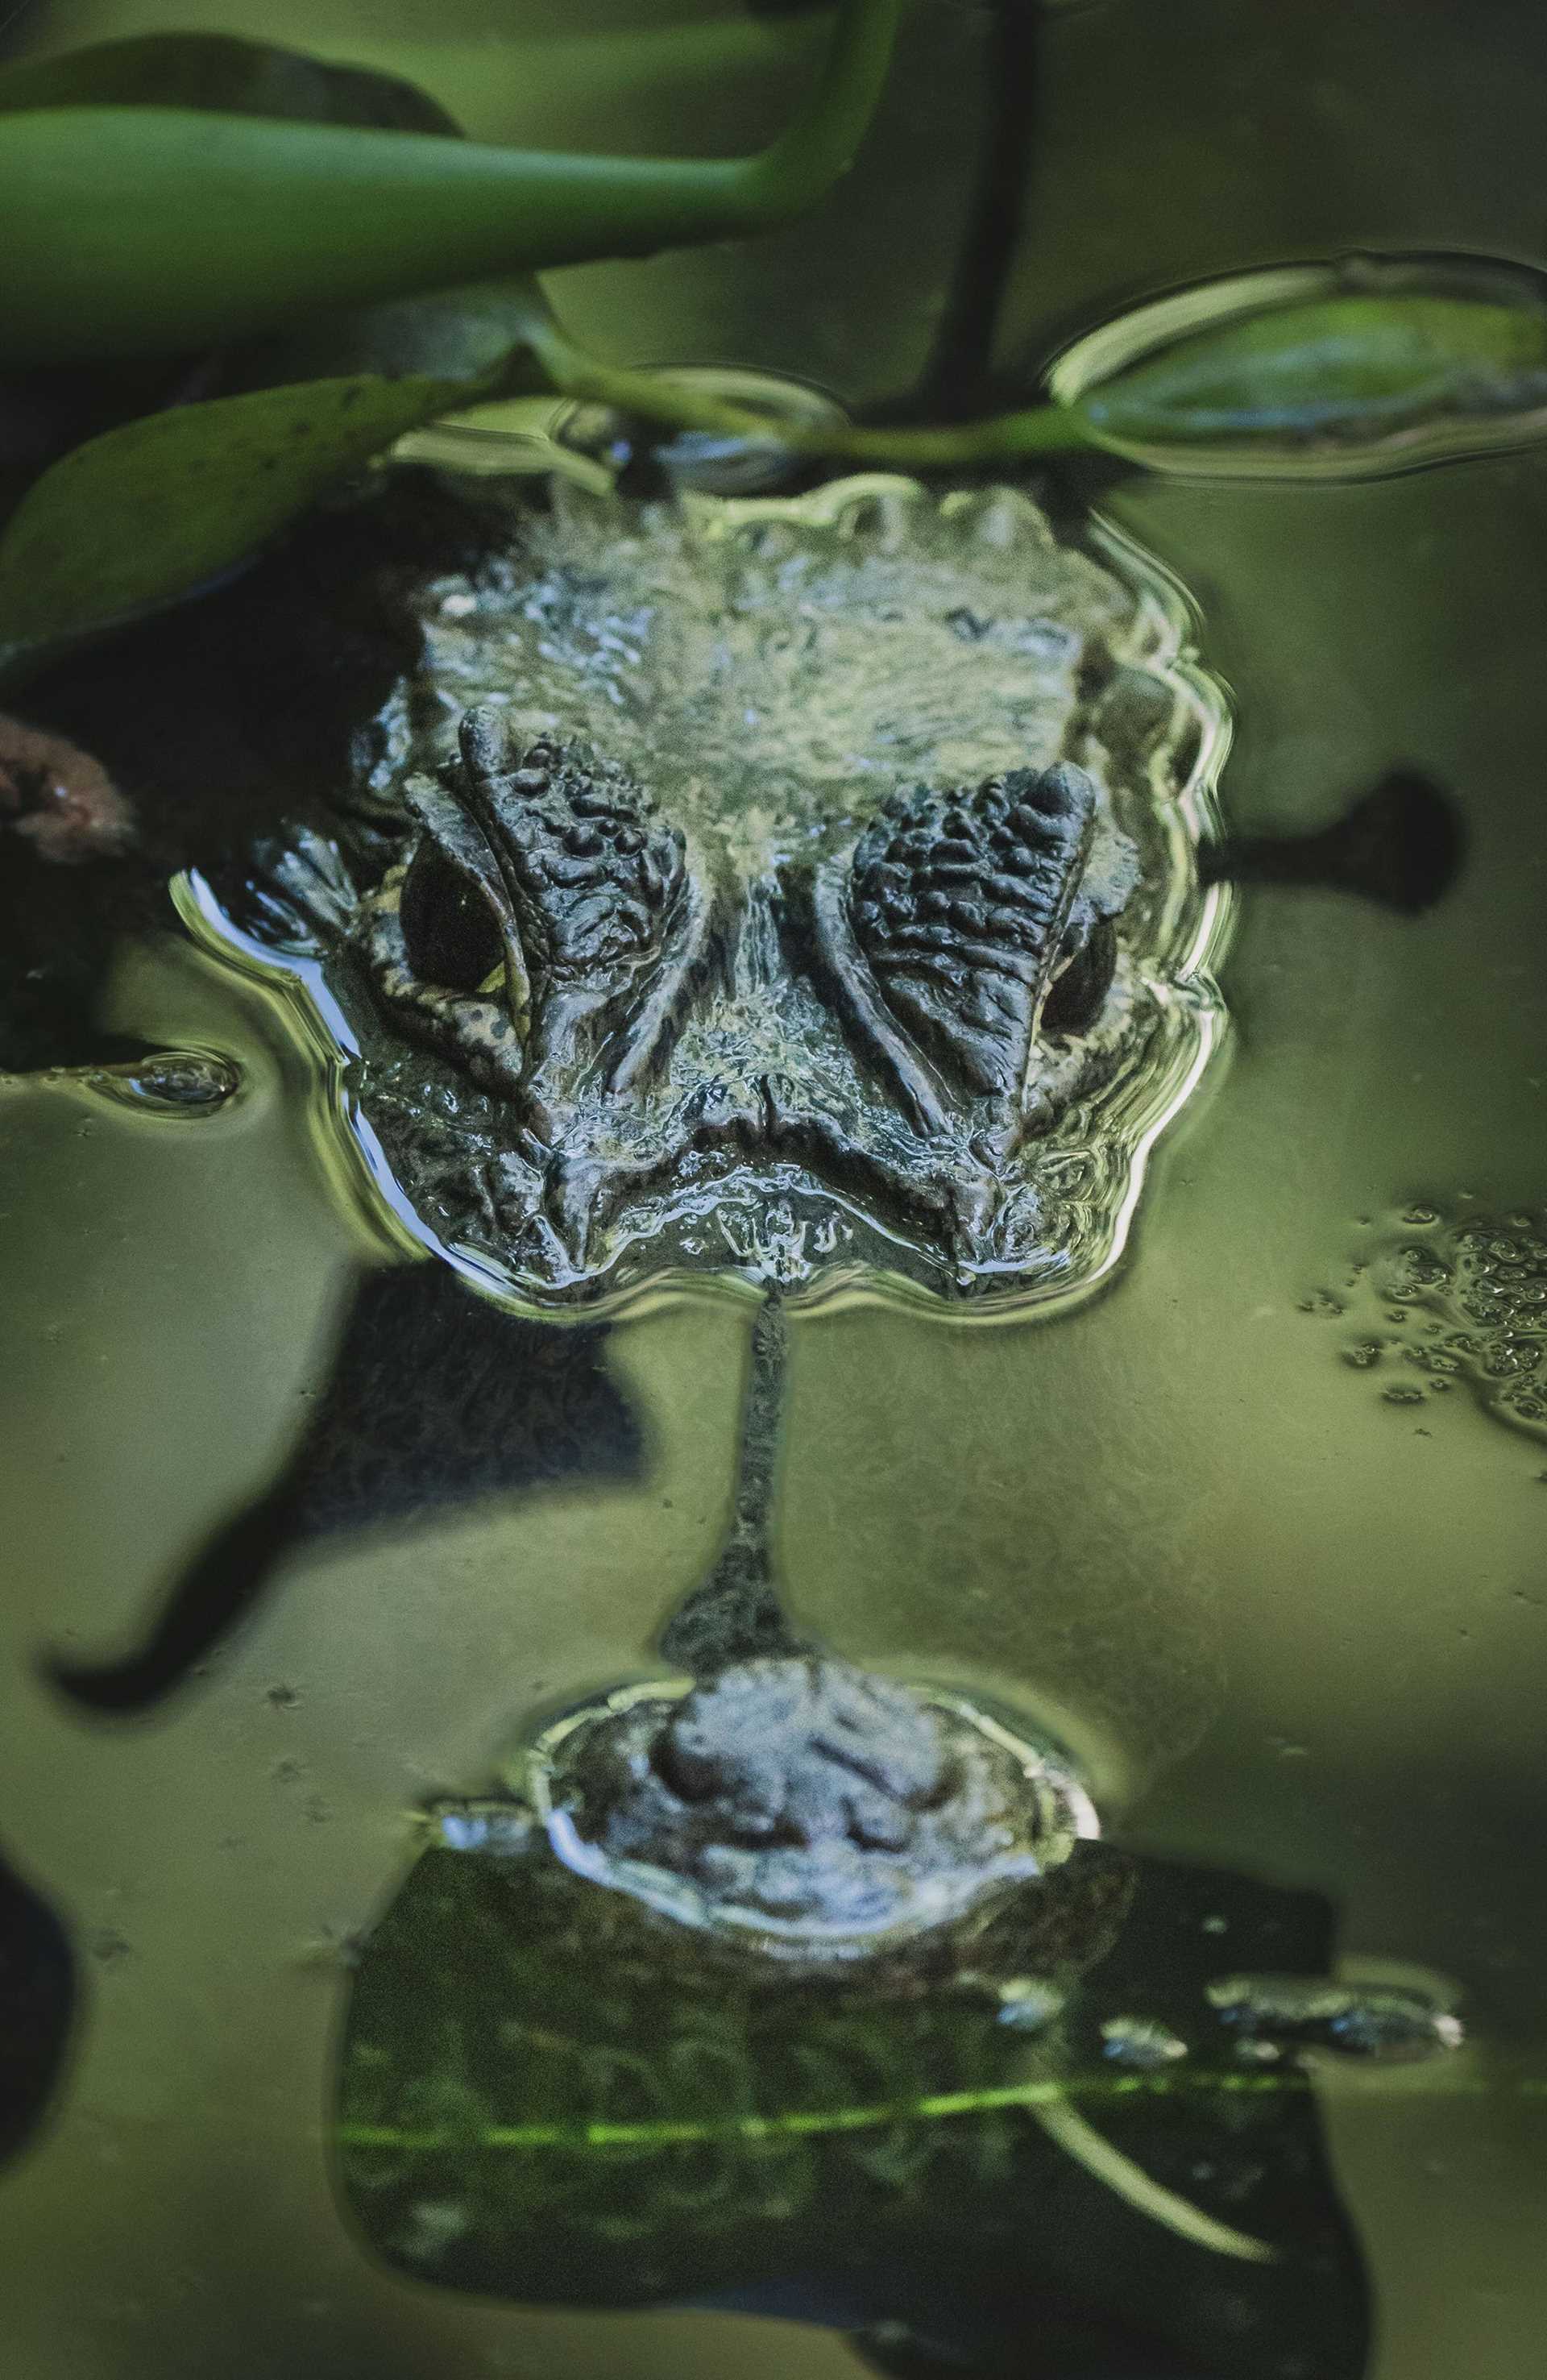  caiman snout poking out of water